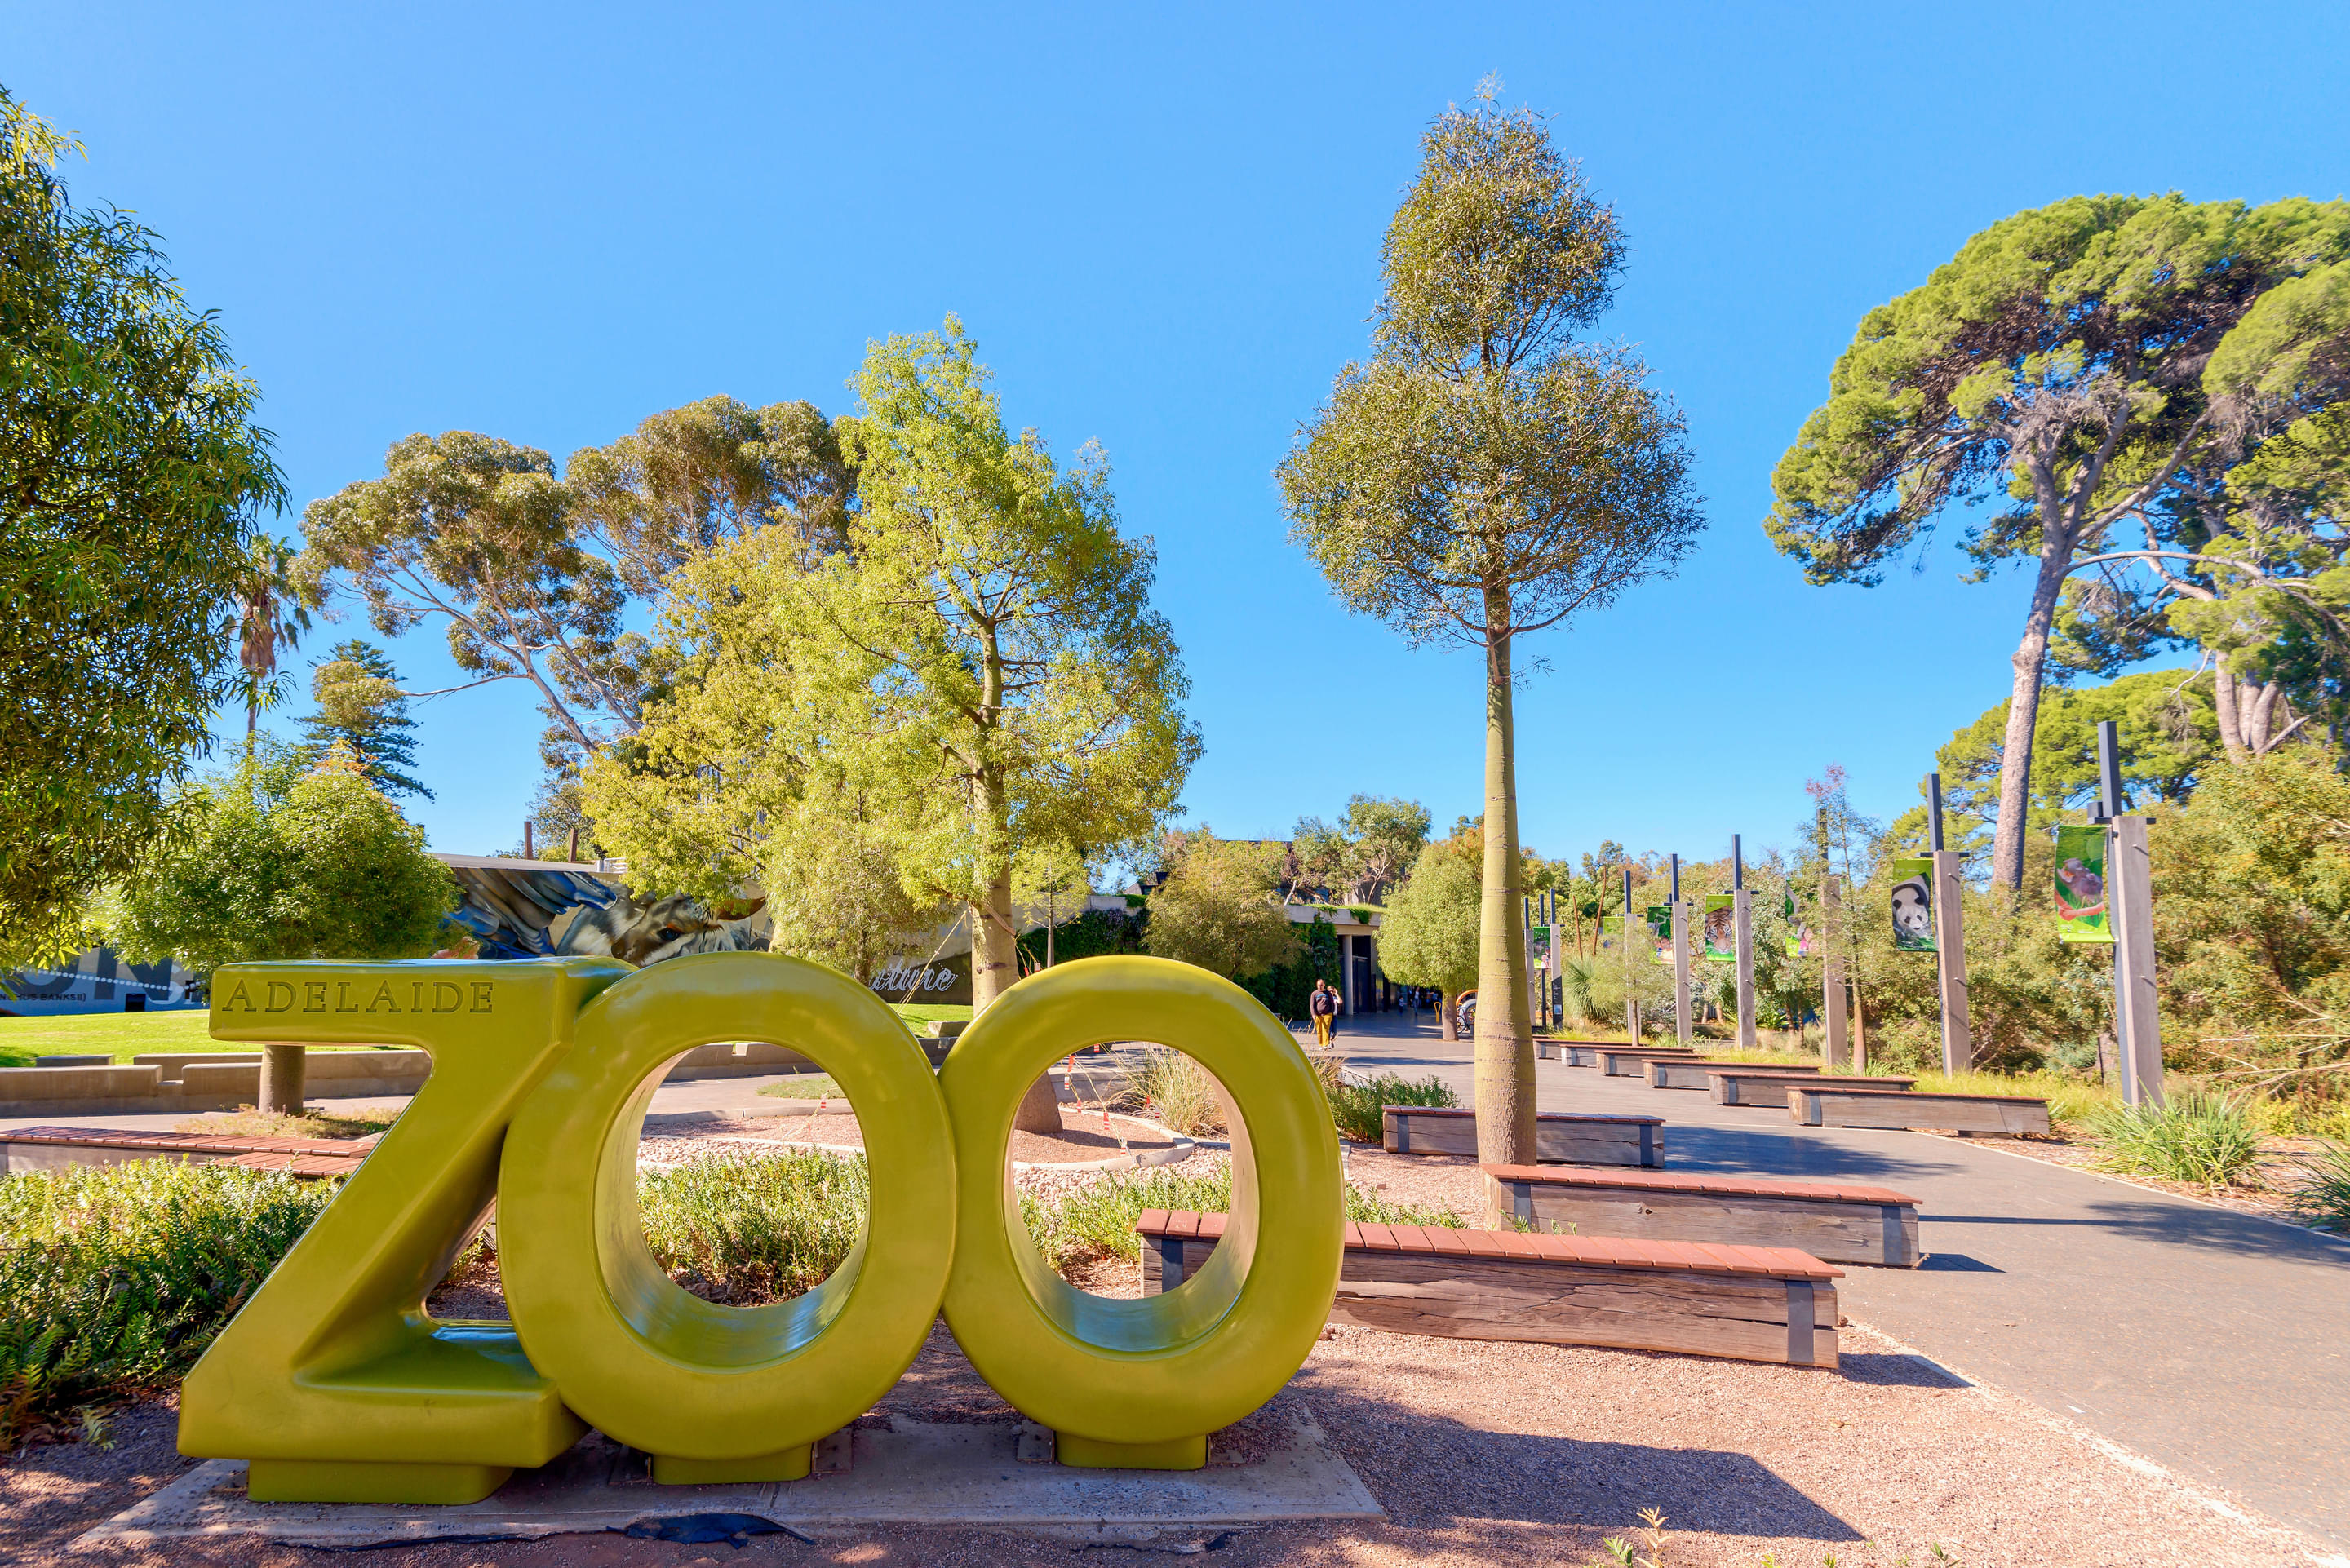 Adelaide Zoo Overview